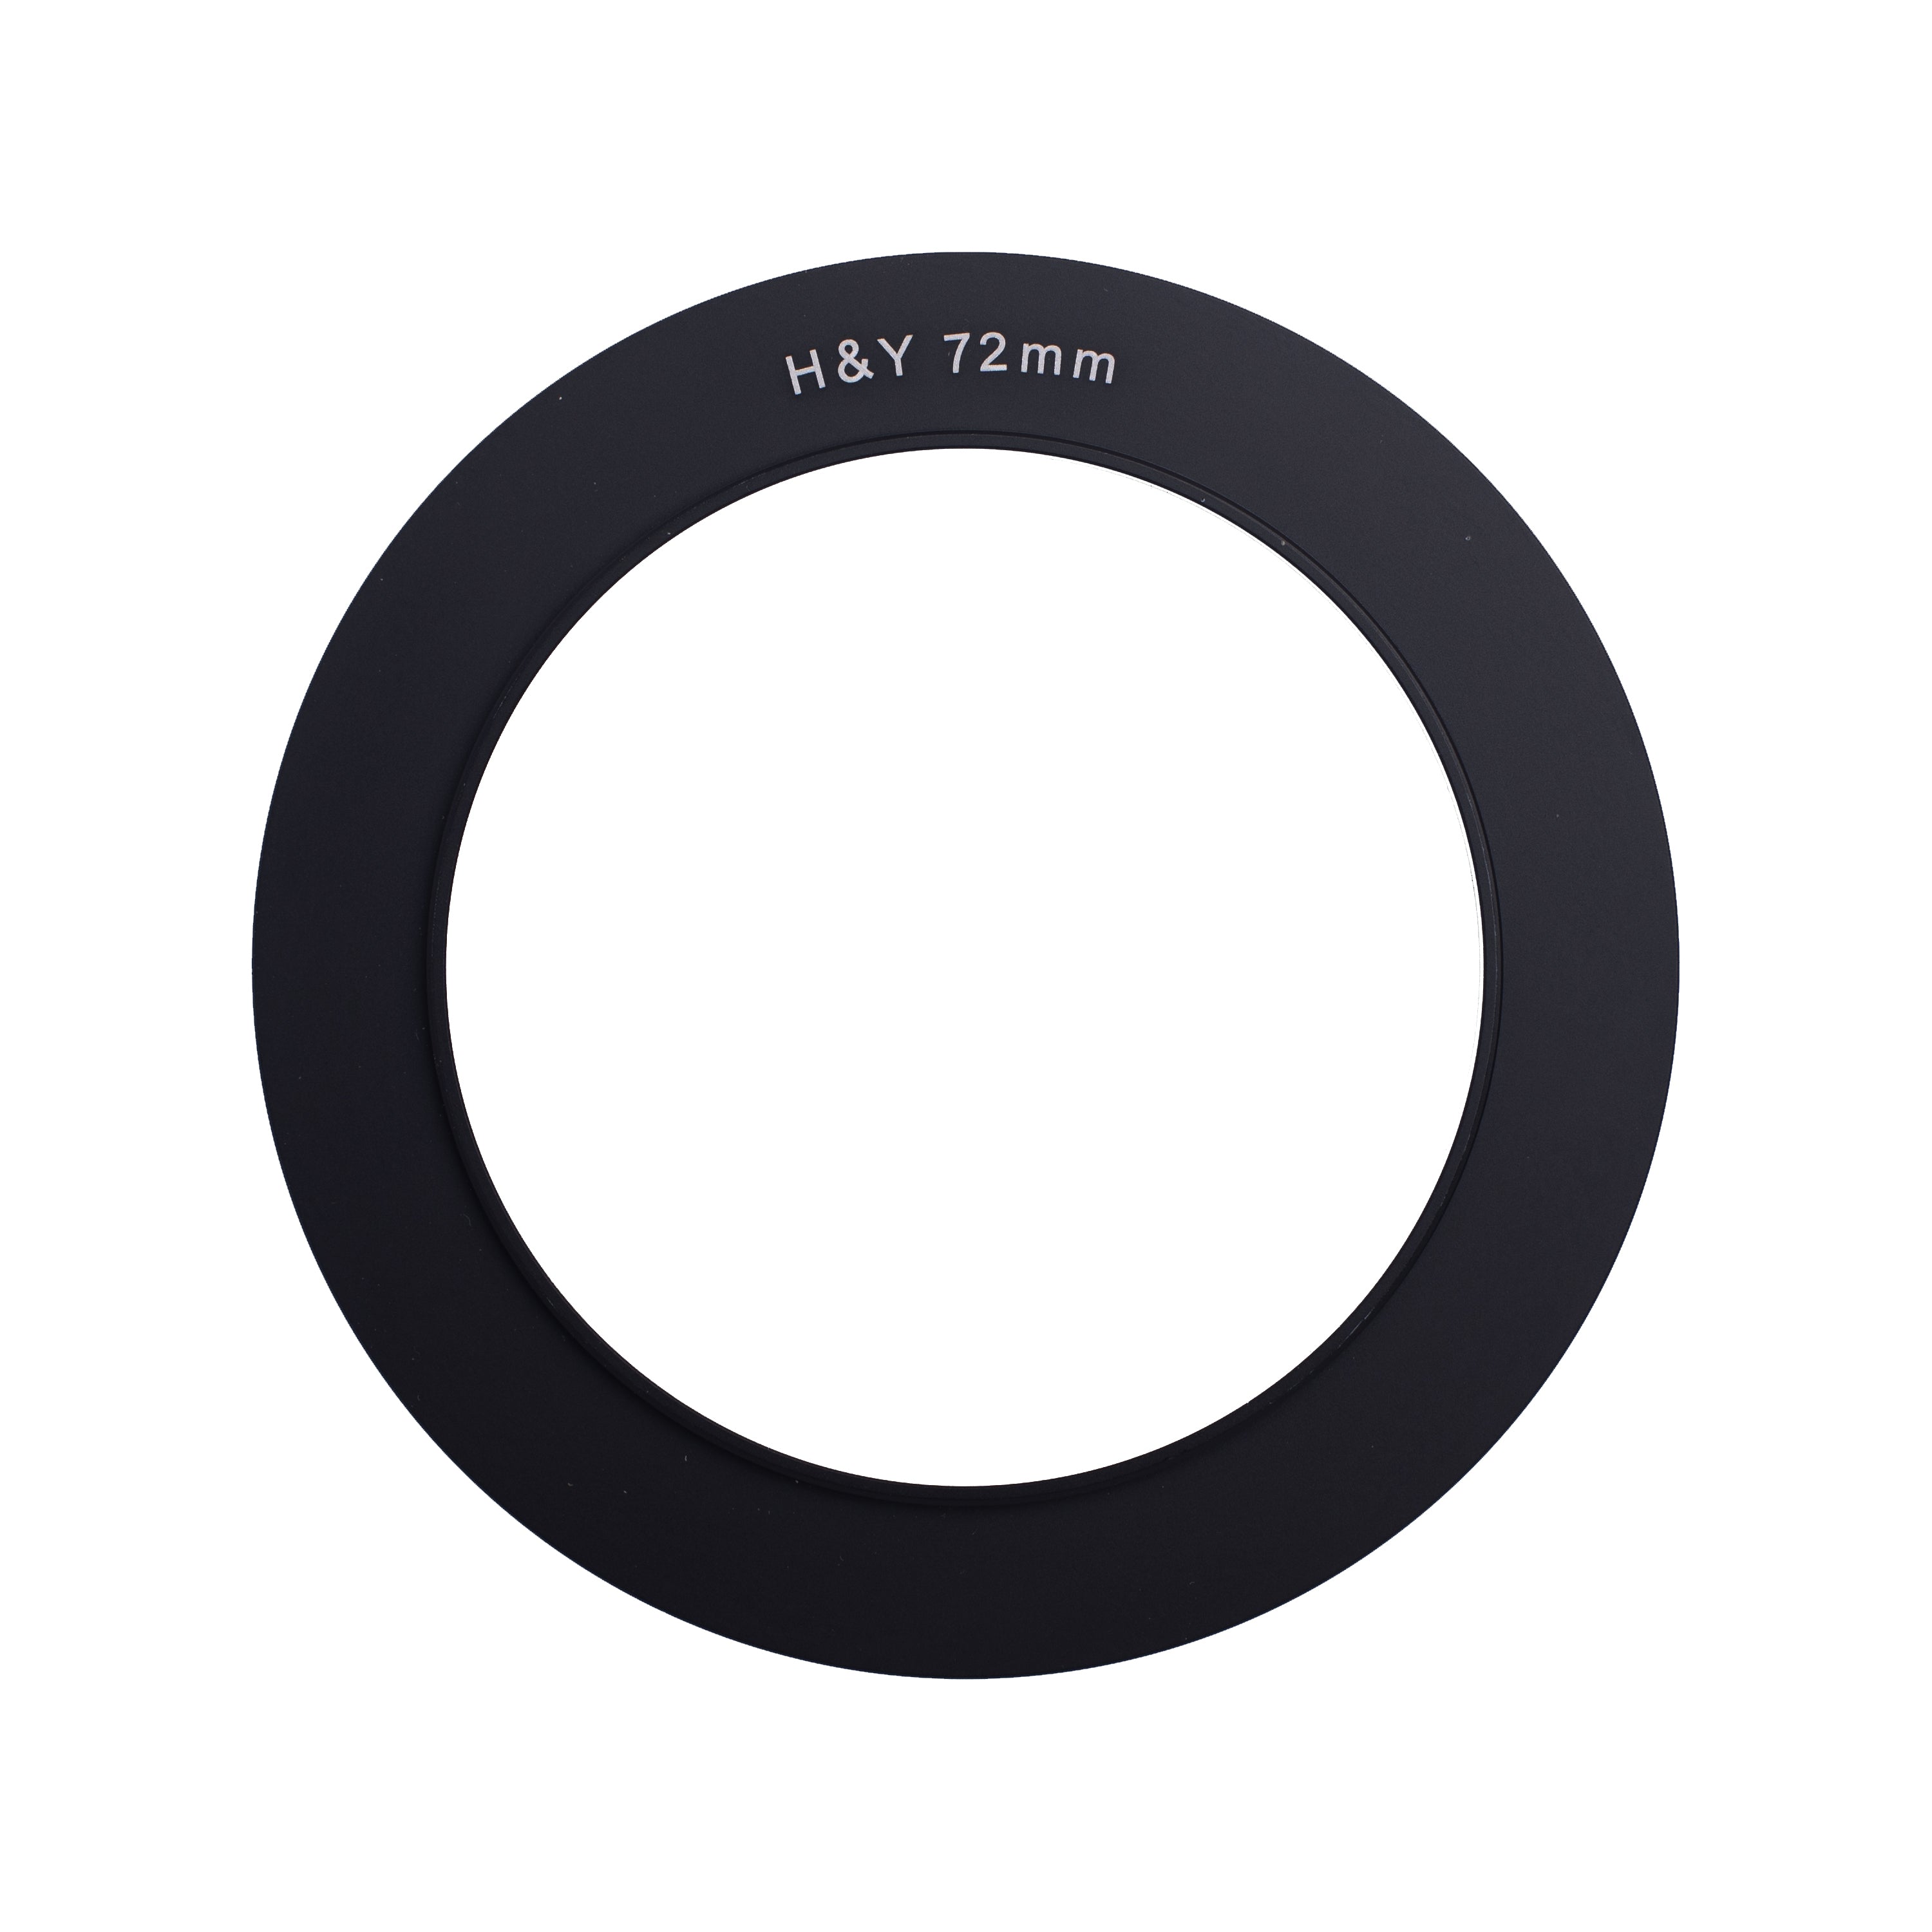 H&Y K- Series Adapter Ring (10 Sizes / 49-86mm)